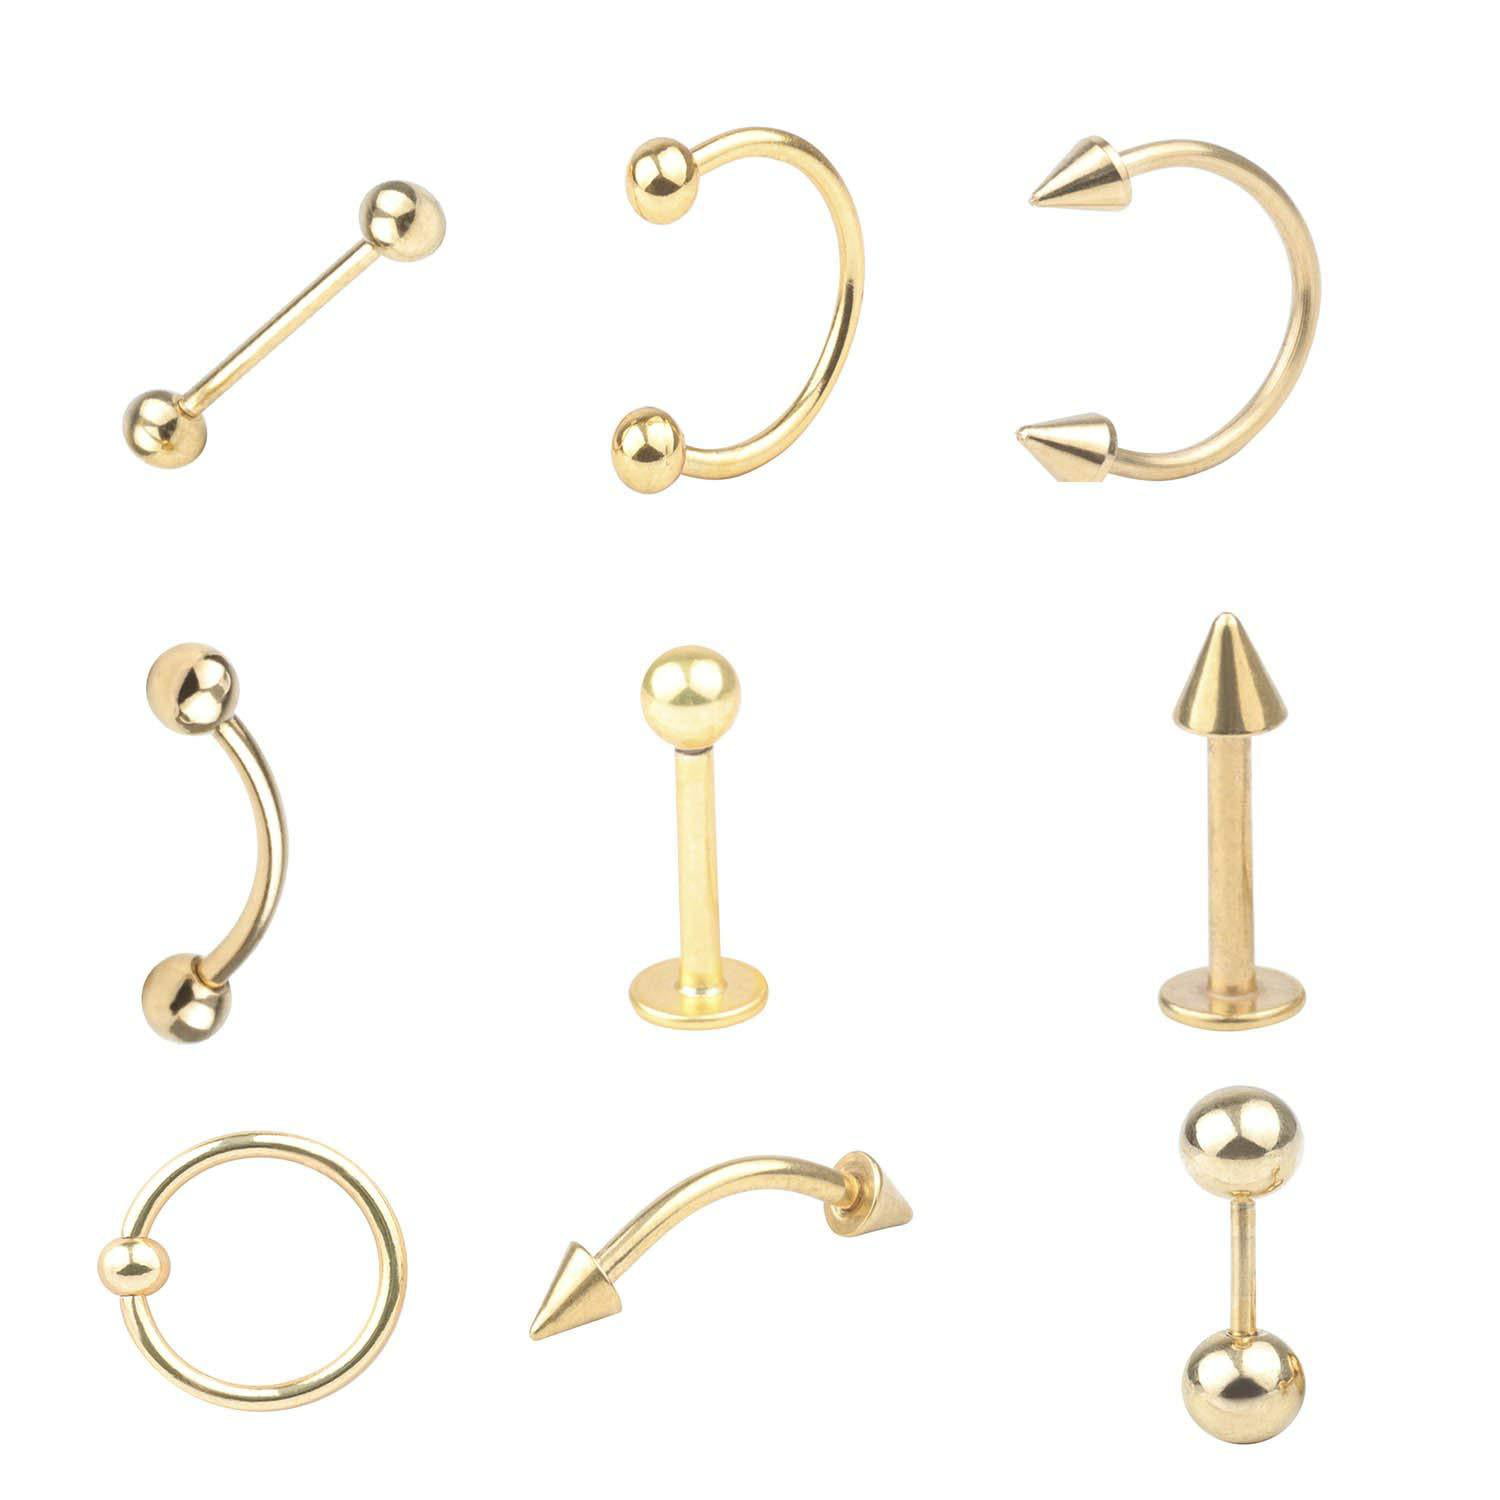 Details about   14K Gold Heart Nose Screw Piercing Jewelry 